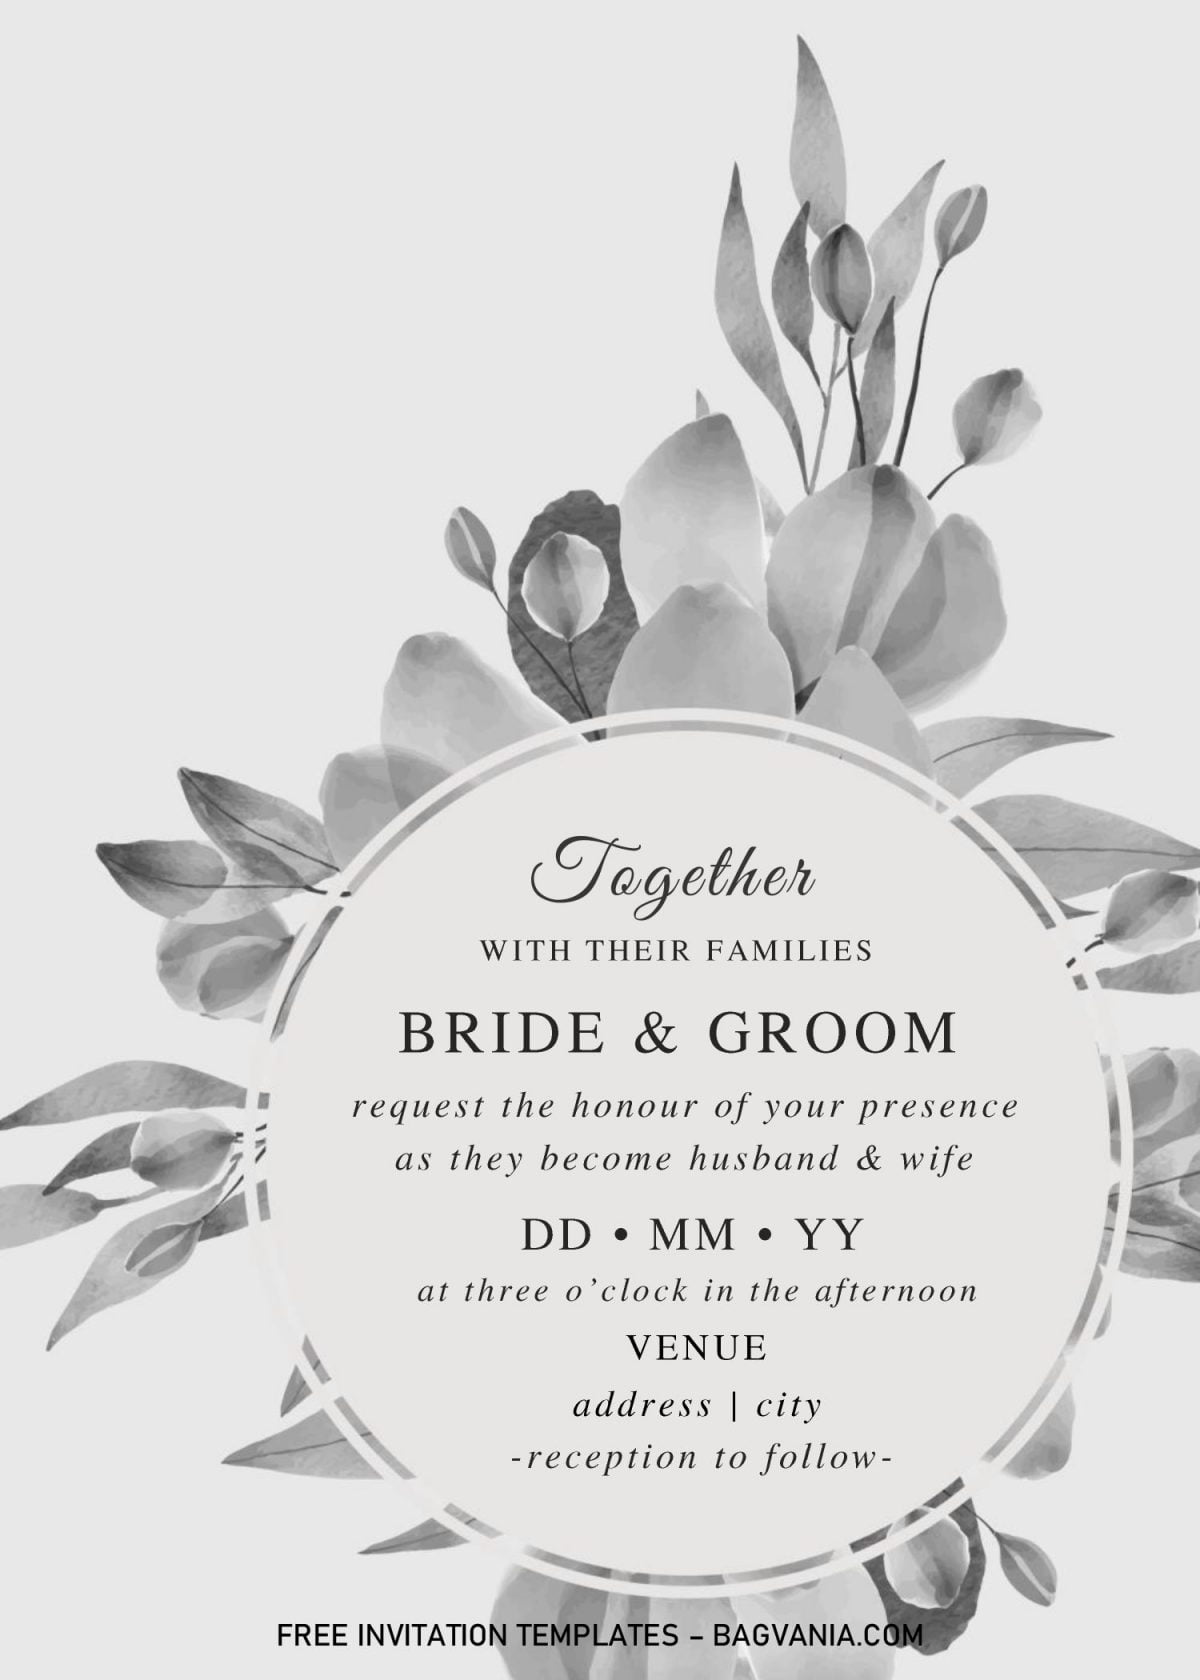 Black And White Wedding Invitation Templates - Editable With MS Word and has monochromatic flowers